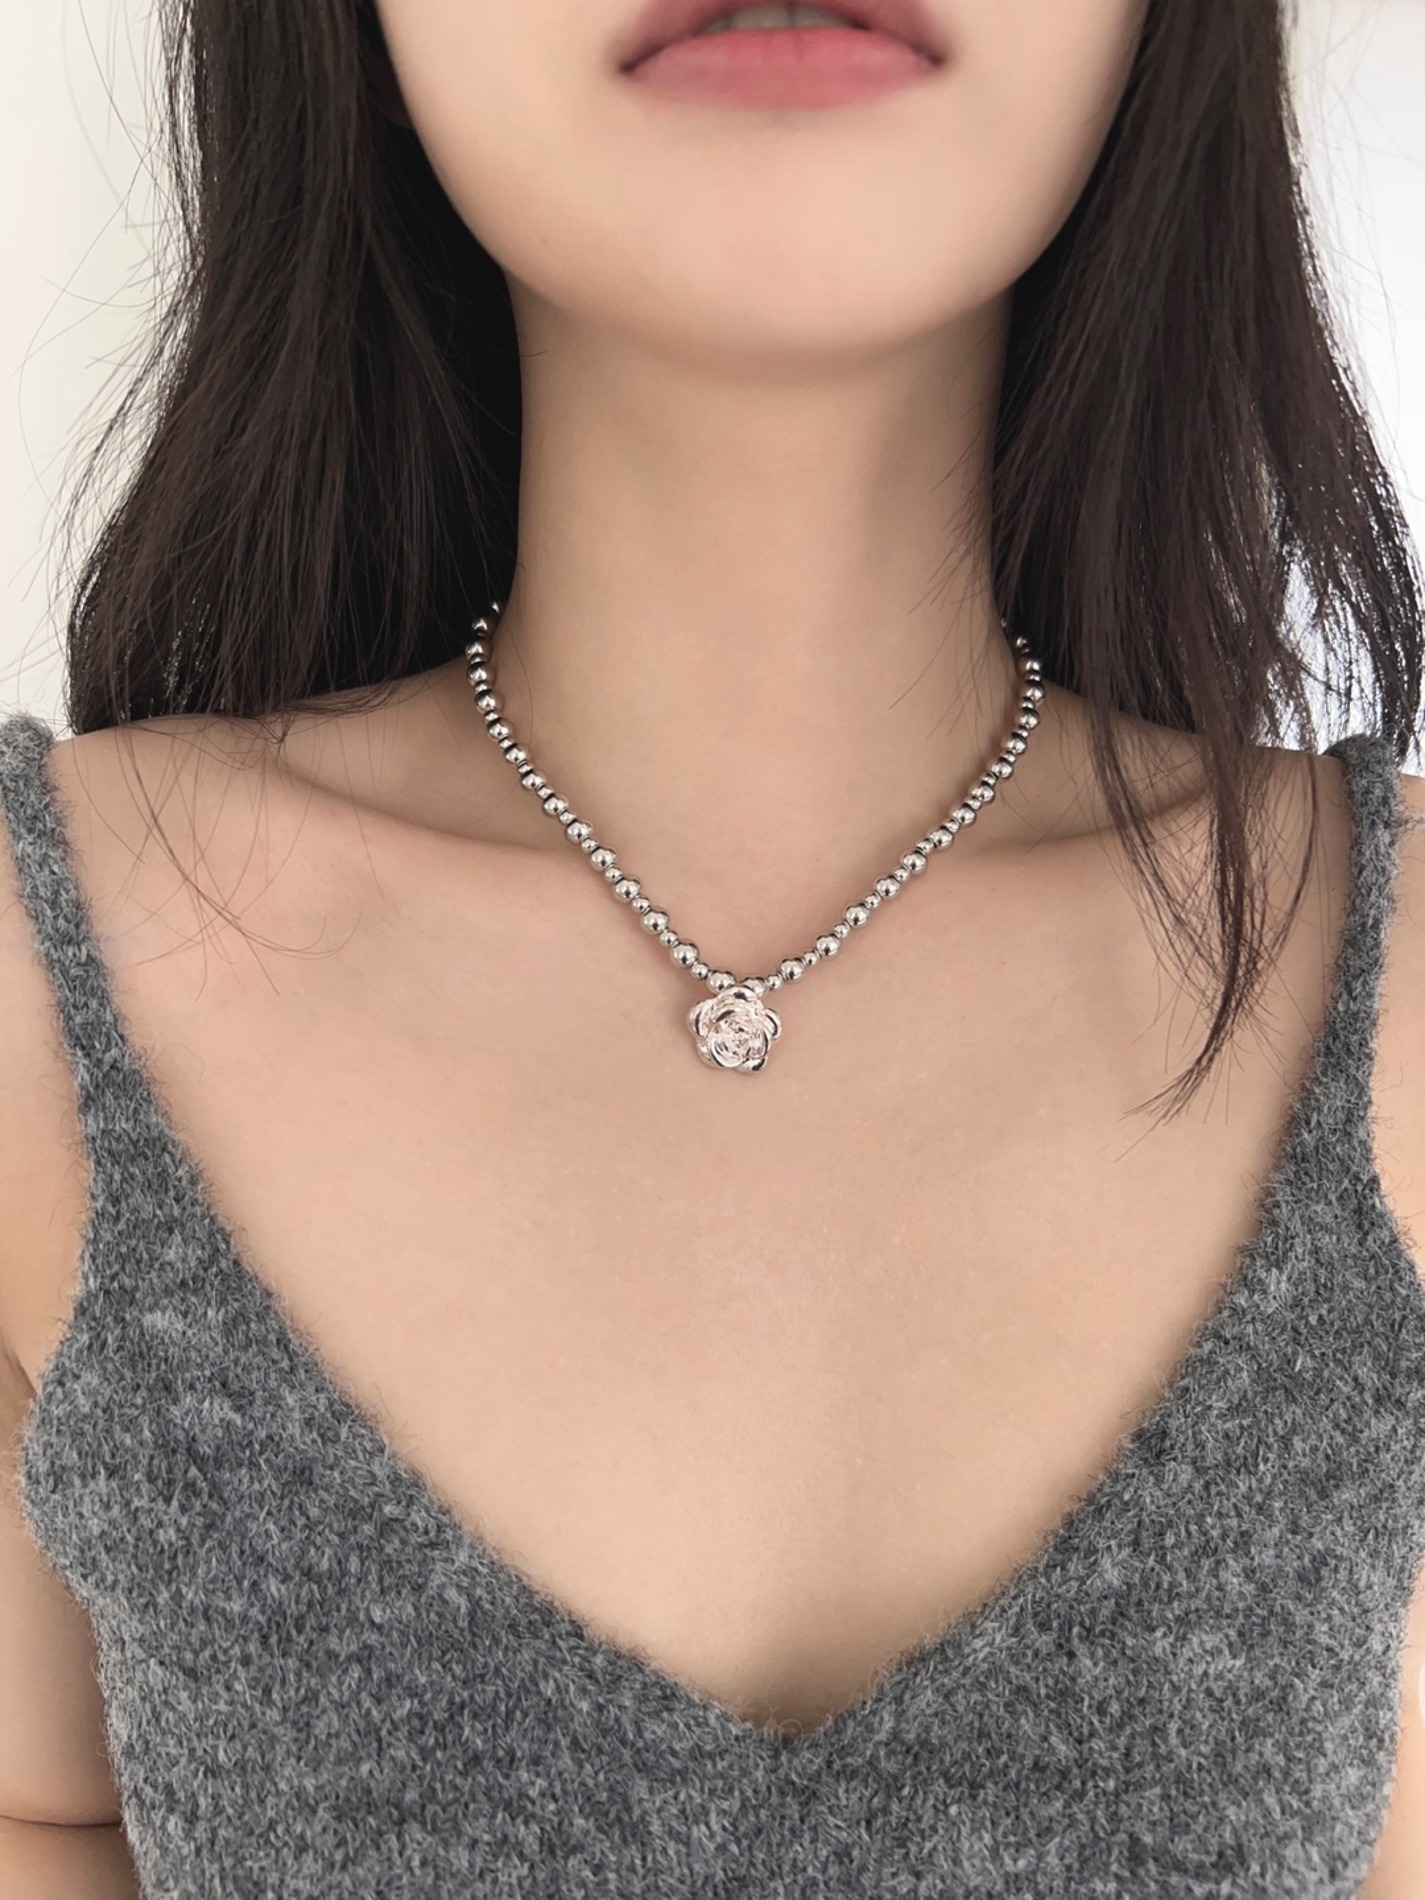 rose ball necklace